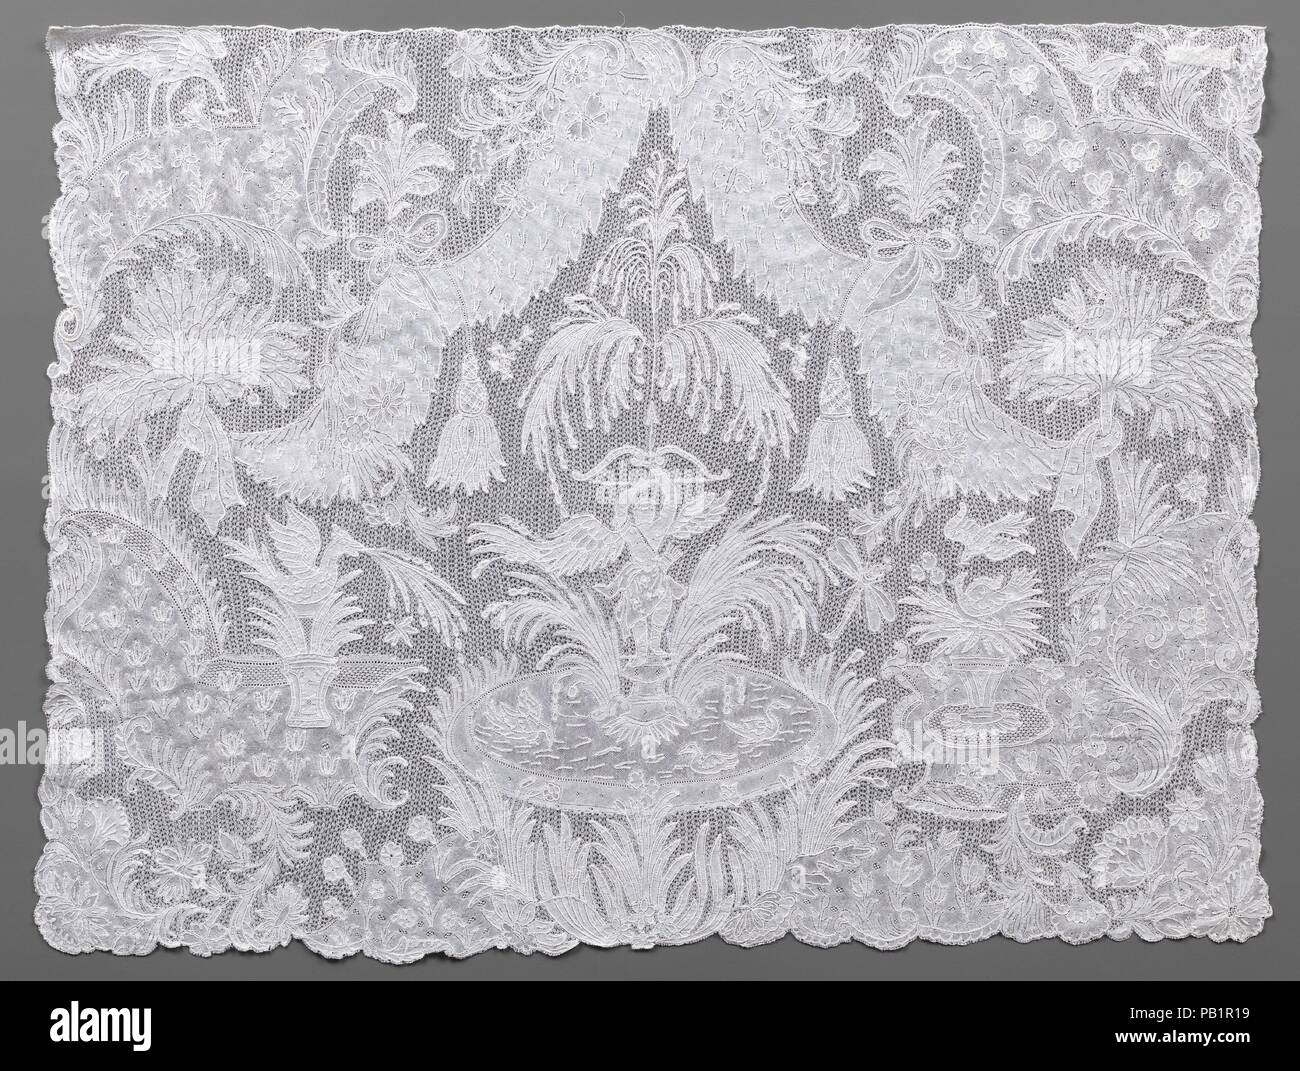 Cravat end. Culture: Flemish, Brussels. Dimensions: Overall (confirmed): 13 × 17 1/4 in. (33 × 43.8 cm). Date: mid-18th century.  Figural lace panels such as this one were items of gentlemen's high-fashion neckwear, meant to be attached to the end of a long, fine fabric cravat. The elaborate imagery, time-consuming to achieve, made the panels extremely expensive accessories. Drawing inspiration from contemporary formal gardens, the design of this example centers on a fountain with water jets that issue from the tip of Amor's raised arrow and fall to fill a basin for swimming birds. Set among t Stock Photo